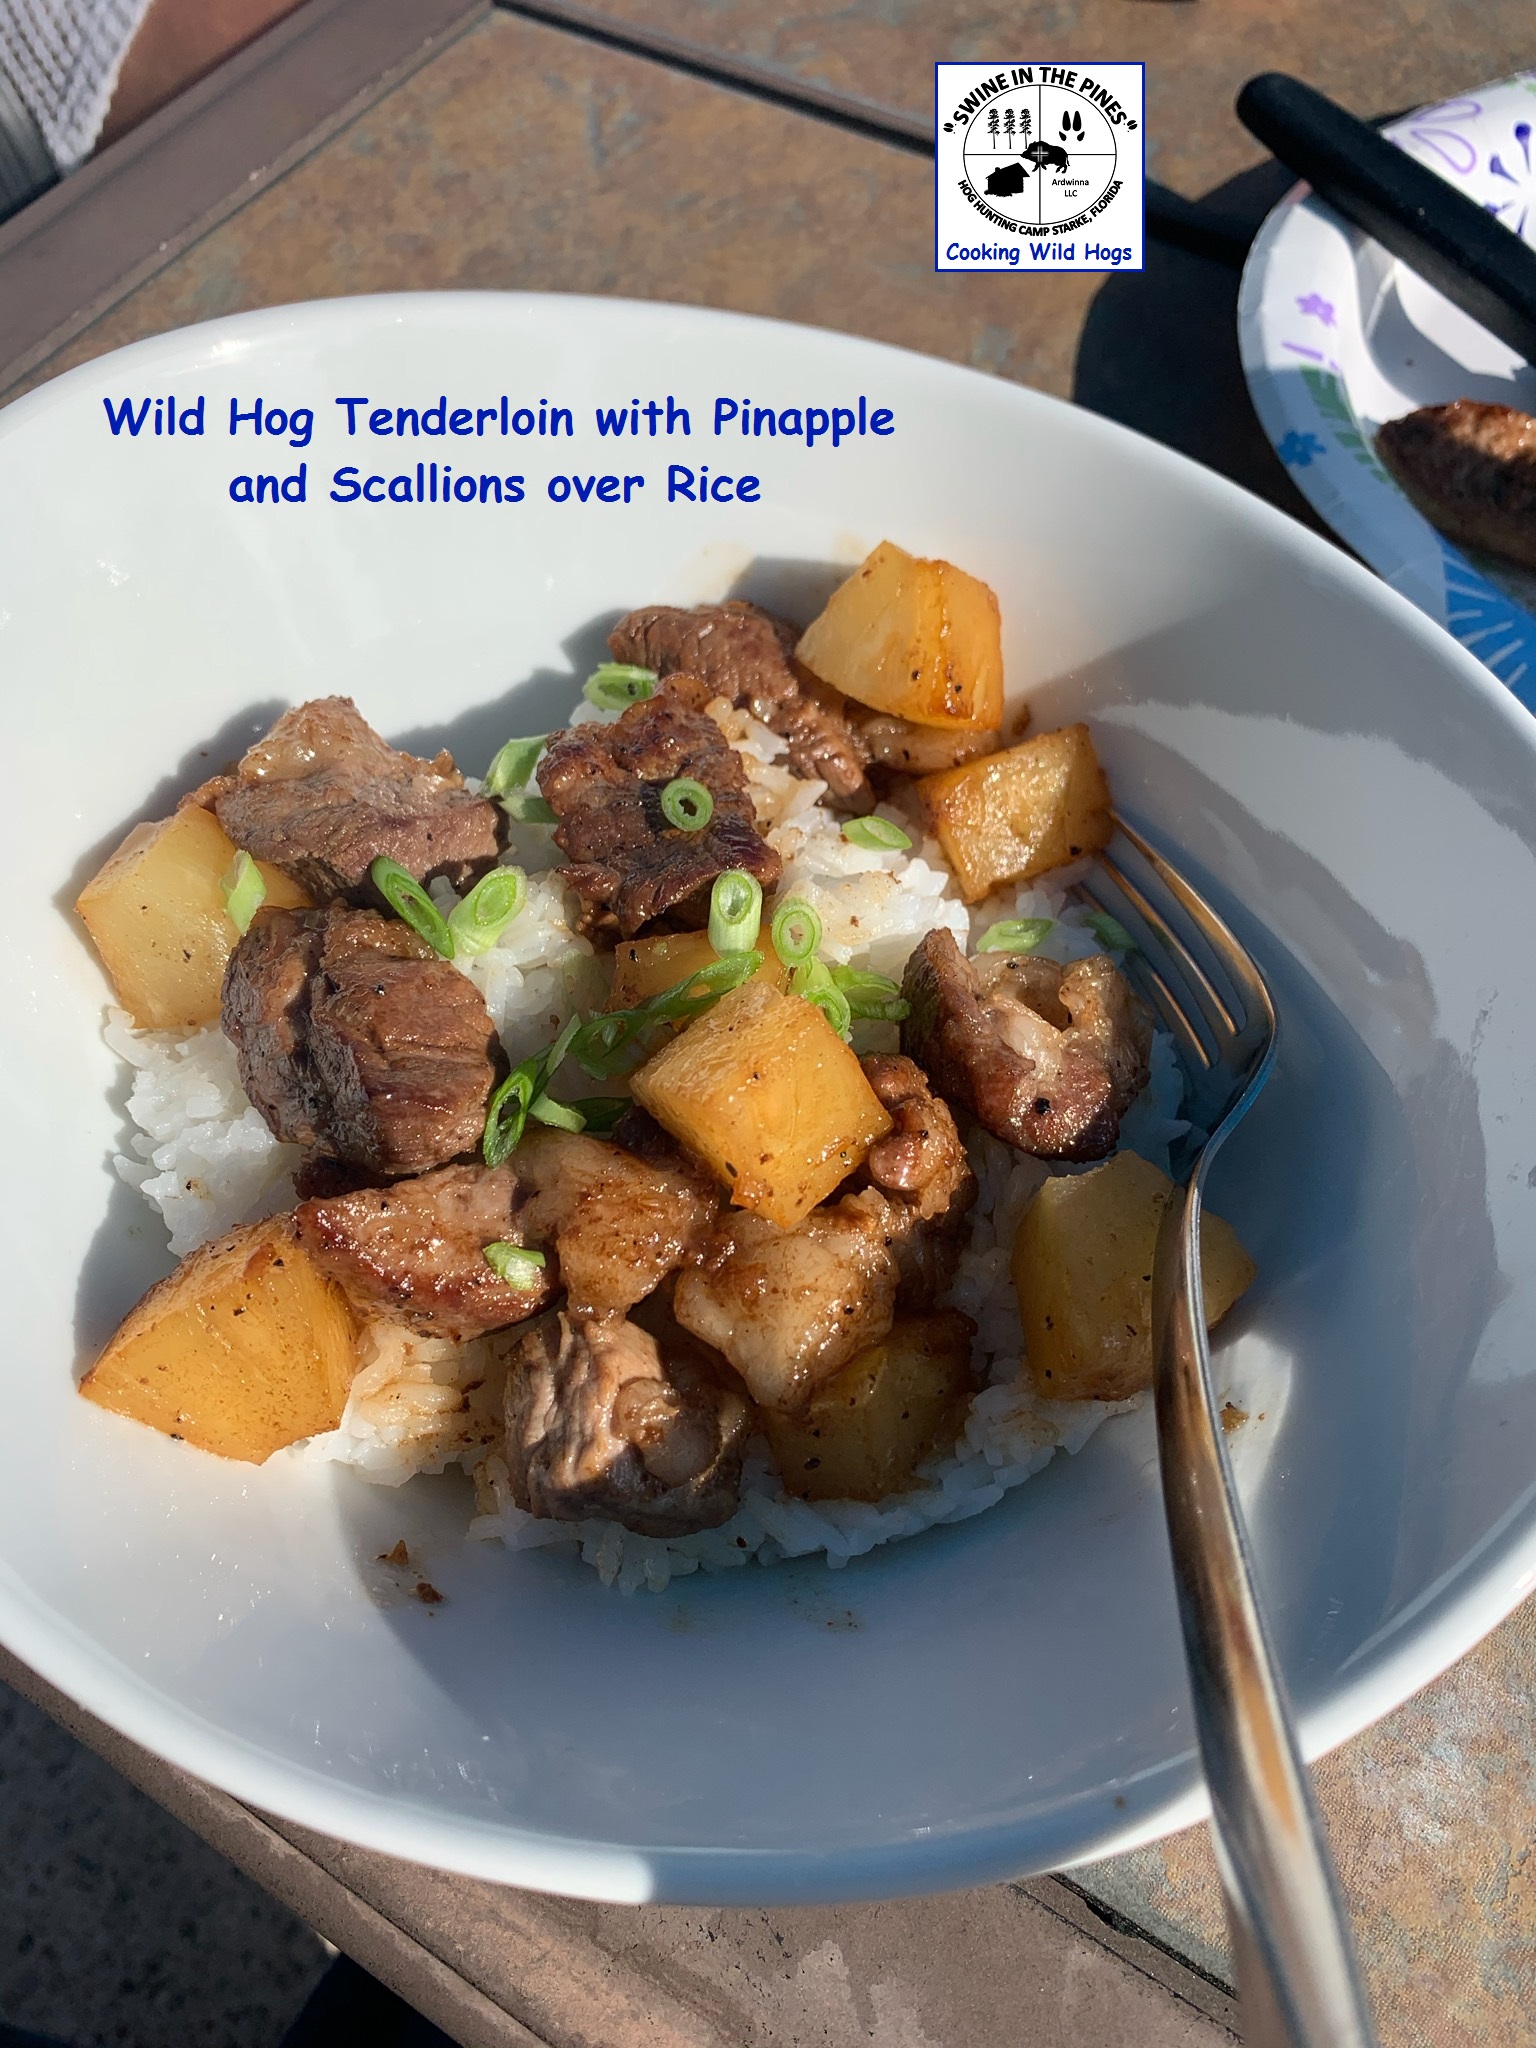 Wild Hog Tenderloin with Pinapple and Scallions over Rice